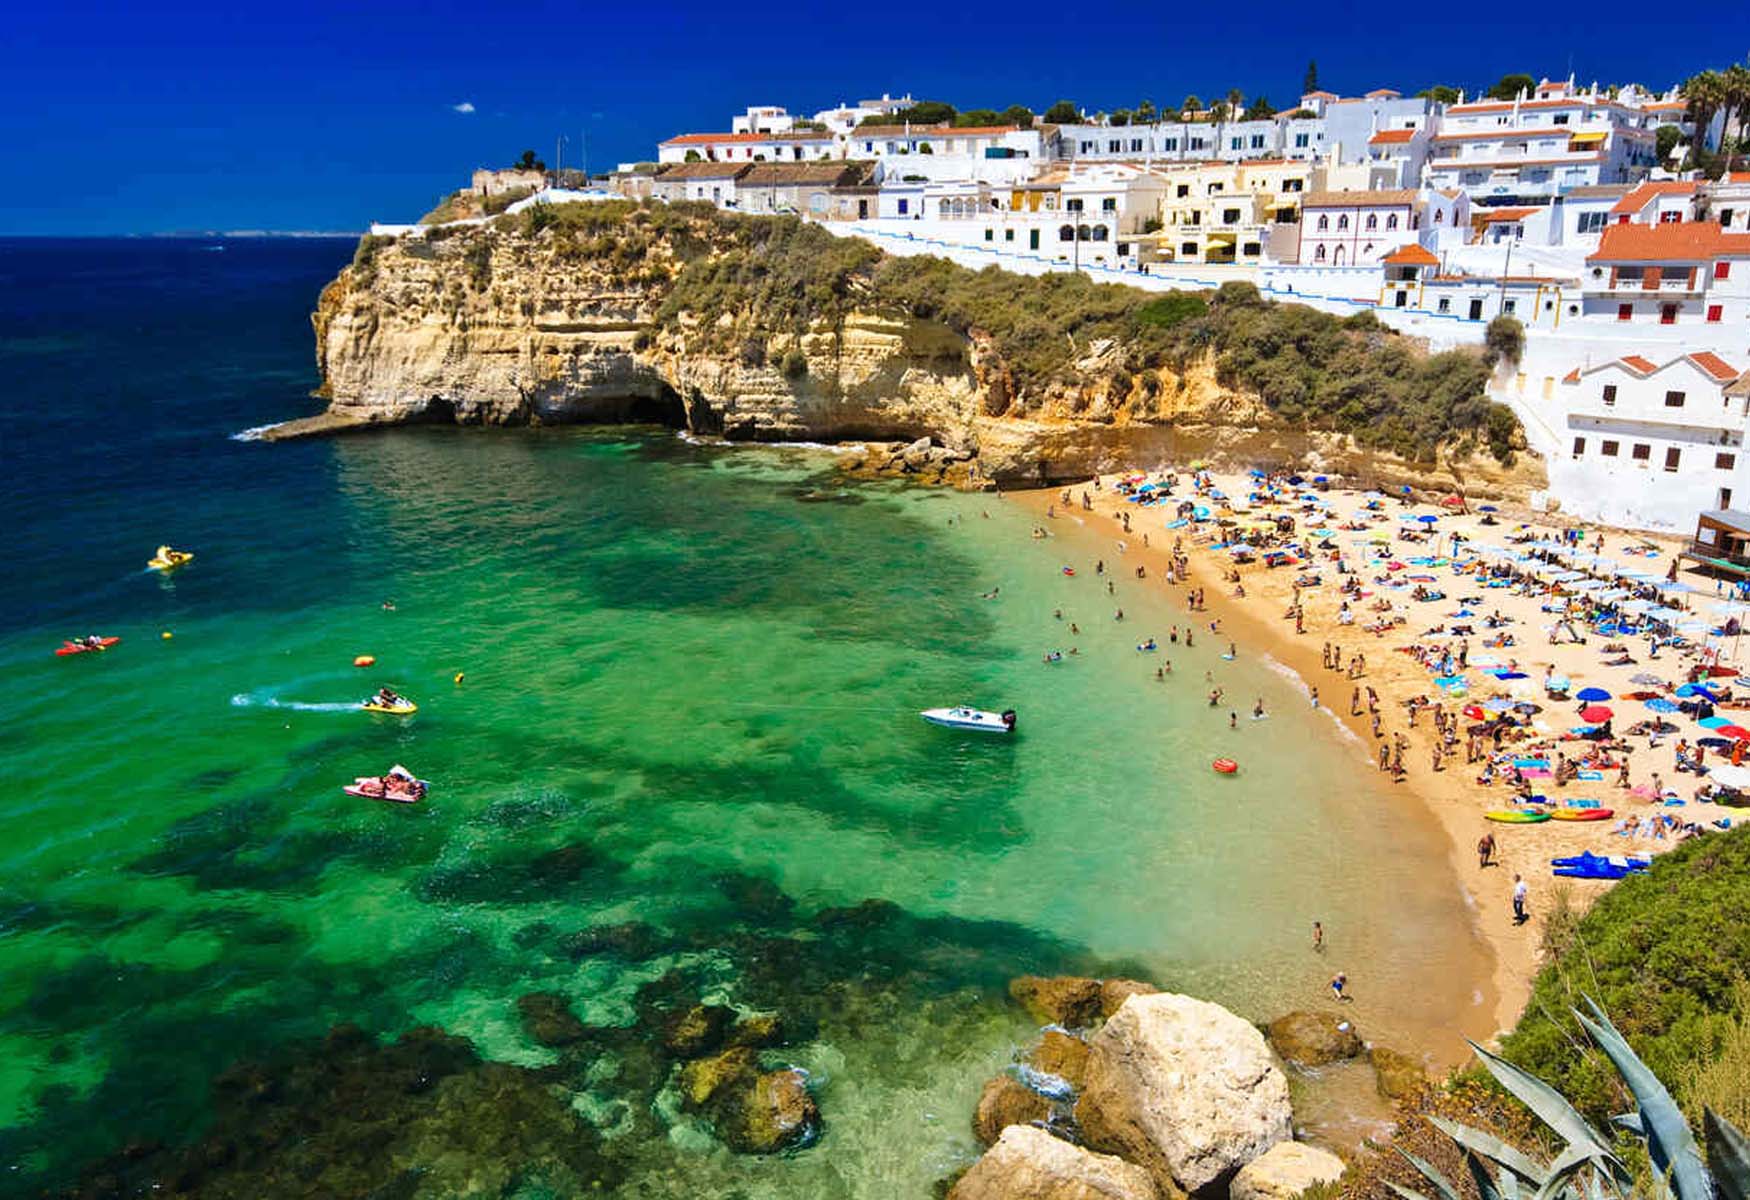 Where To Stay In Algarve: The BEST Areas